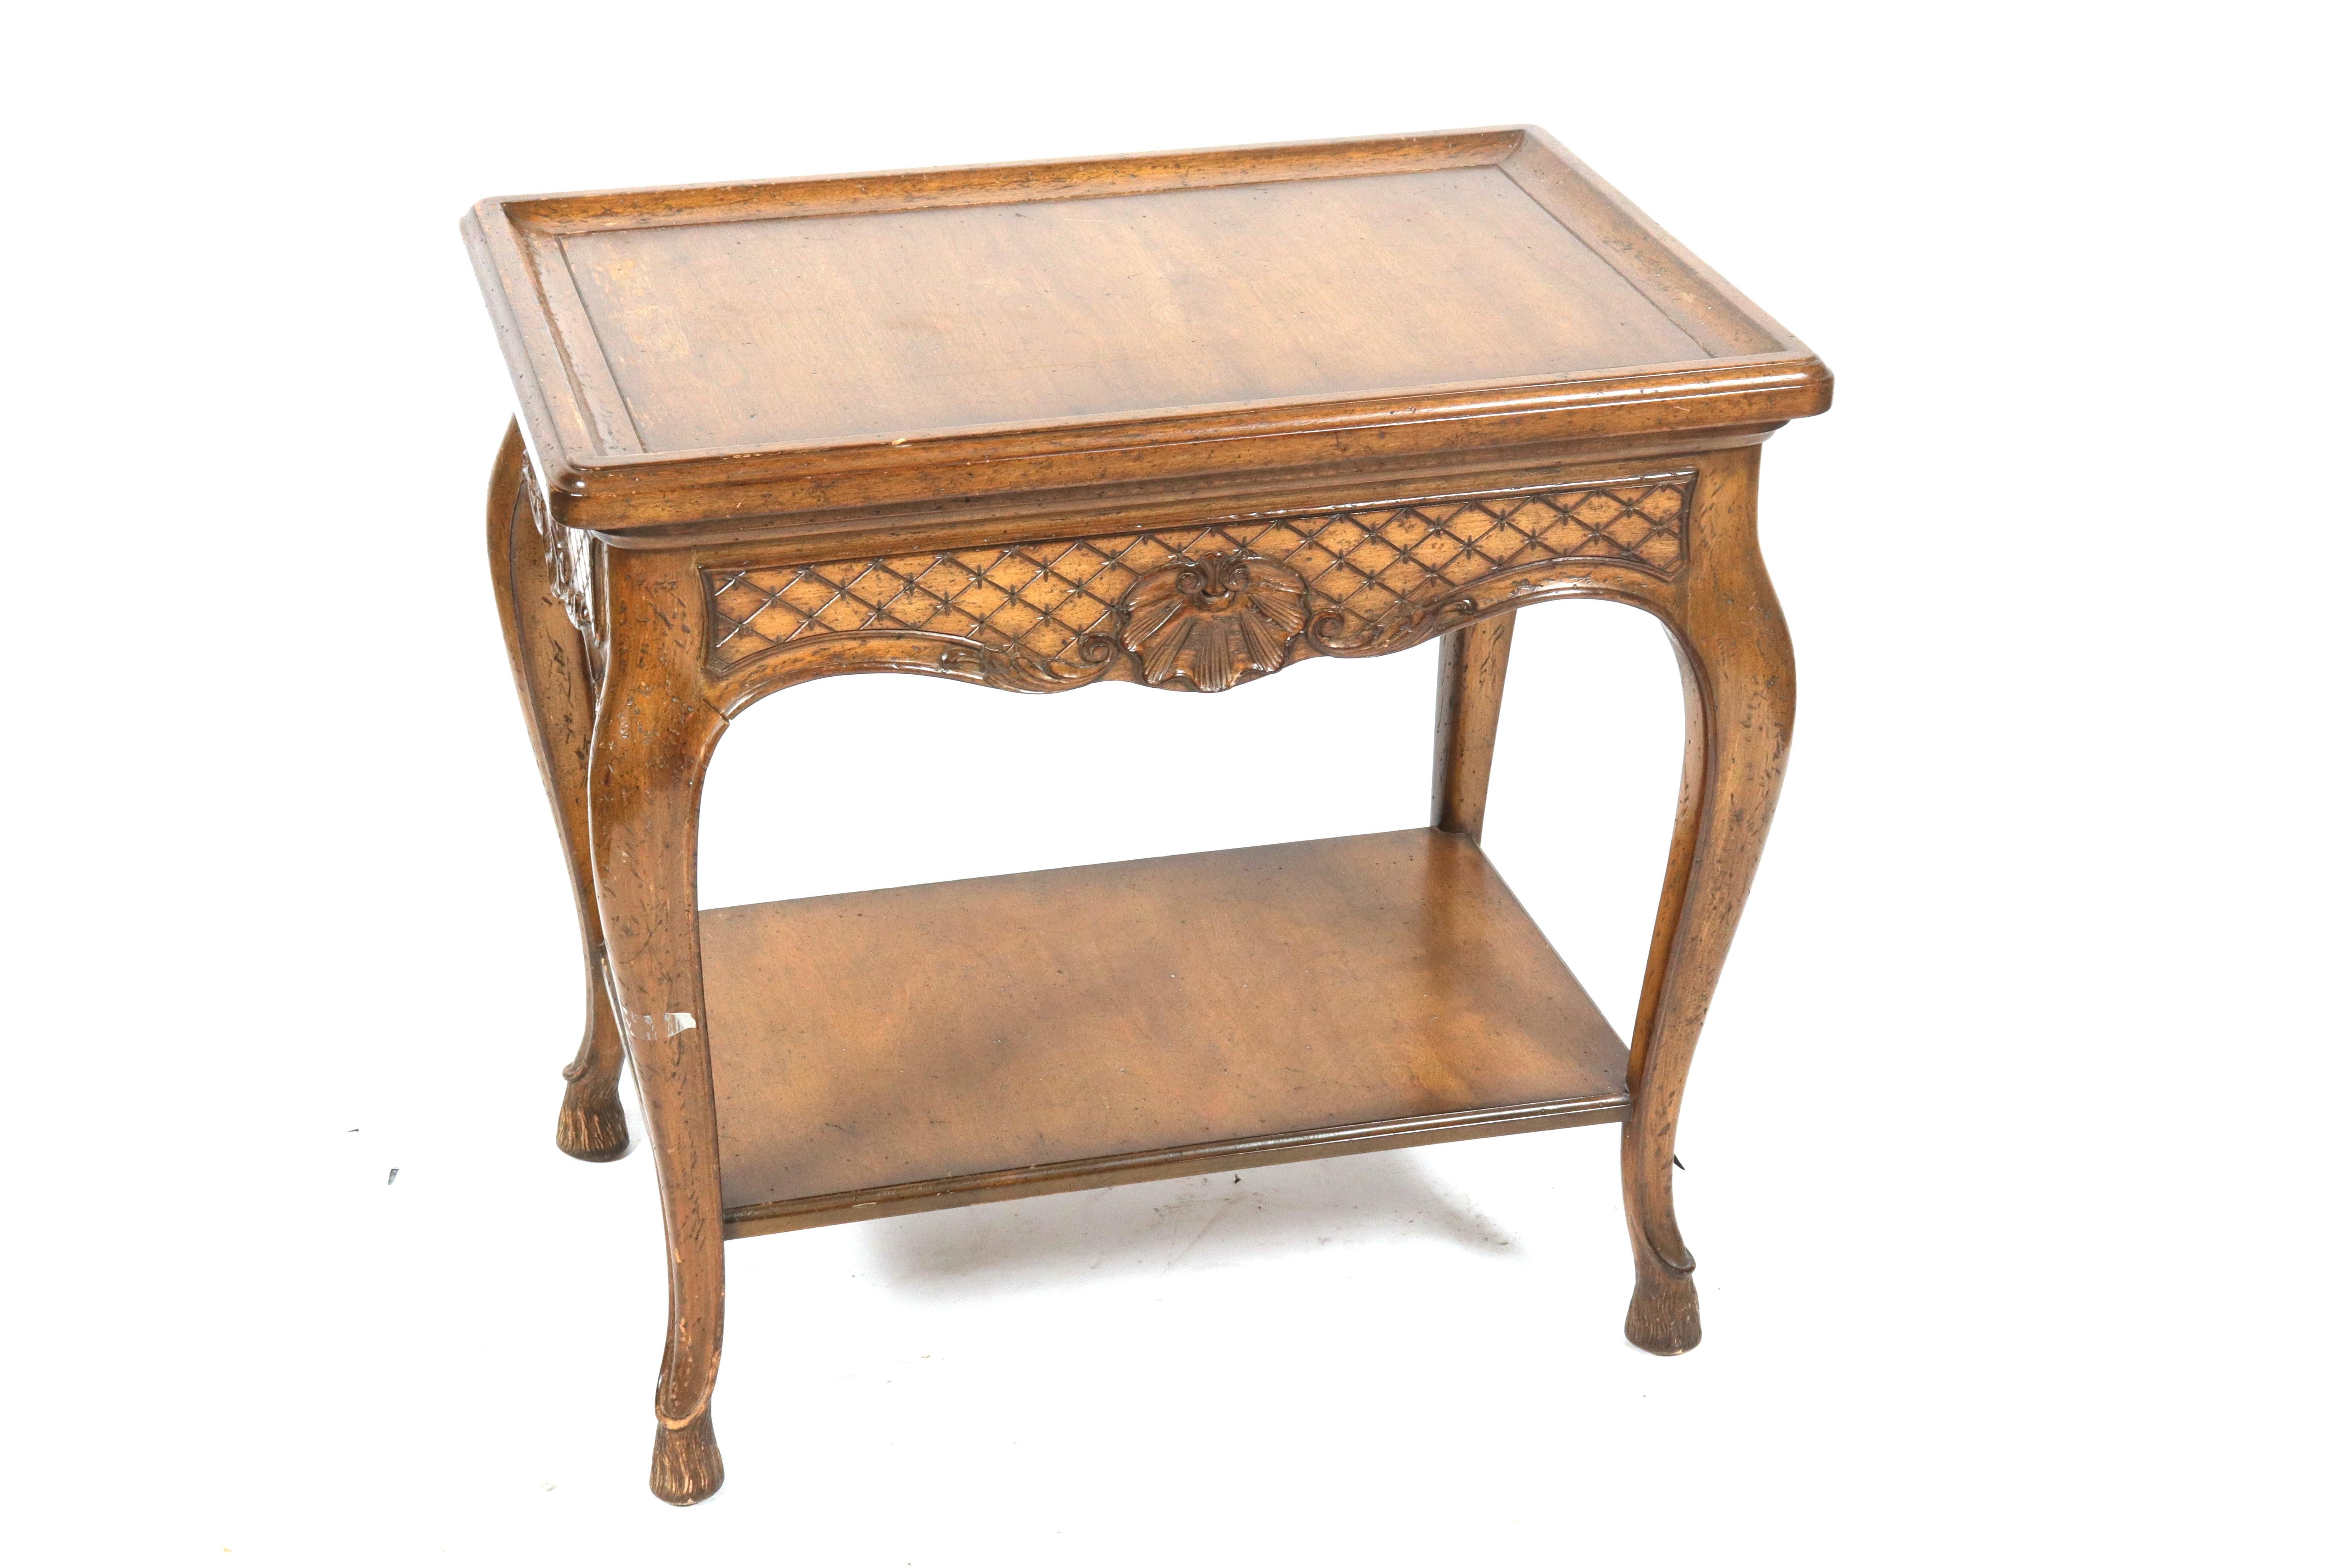 Auffray attributed Louis XV manner two-tier serving table, 20th century, with single drawer, the sides with star and lattice motif carving centered by shell motifs, all raised on stylized pieds-de-biche feet. Measures: 28.5